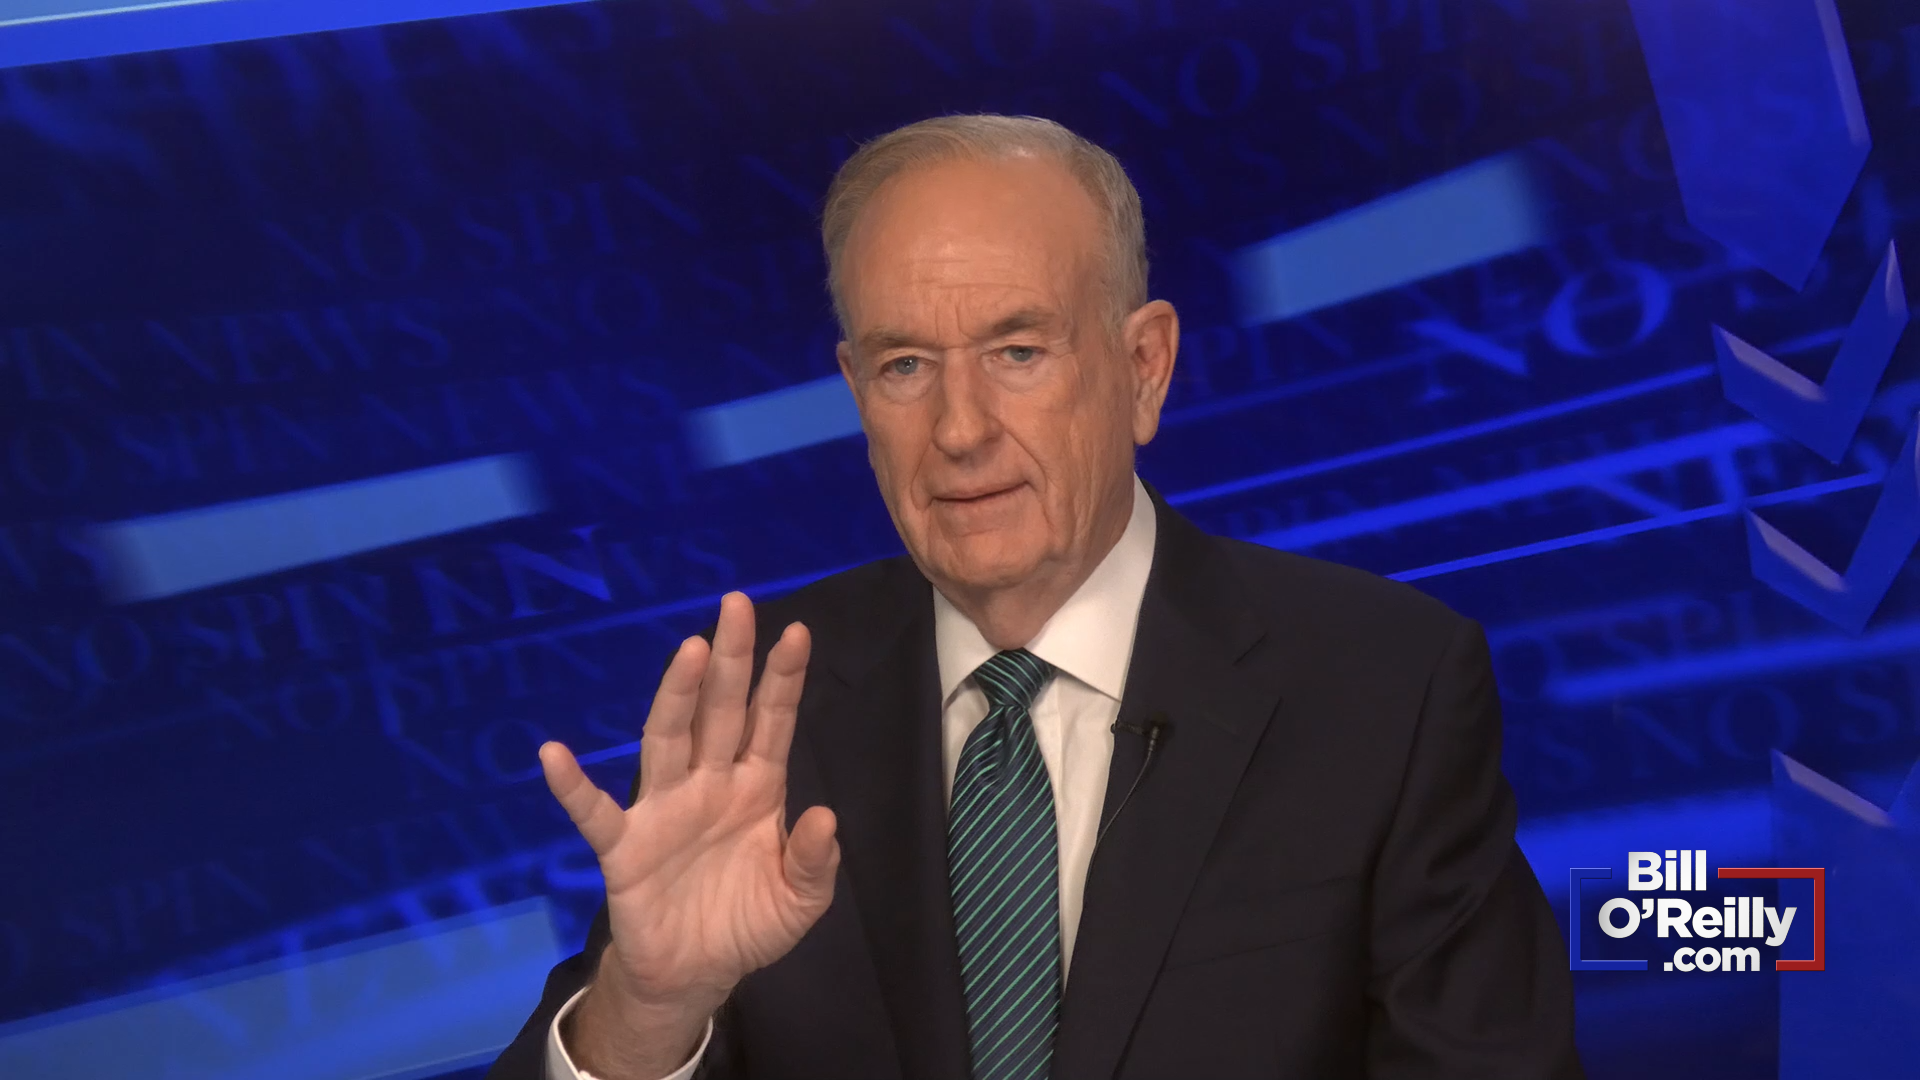 O'Reilly Reports on 'Killing' Books Removed in Florida, DeSantis' Reaction